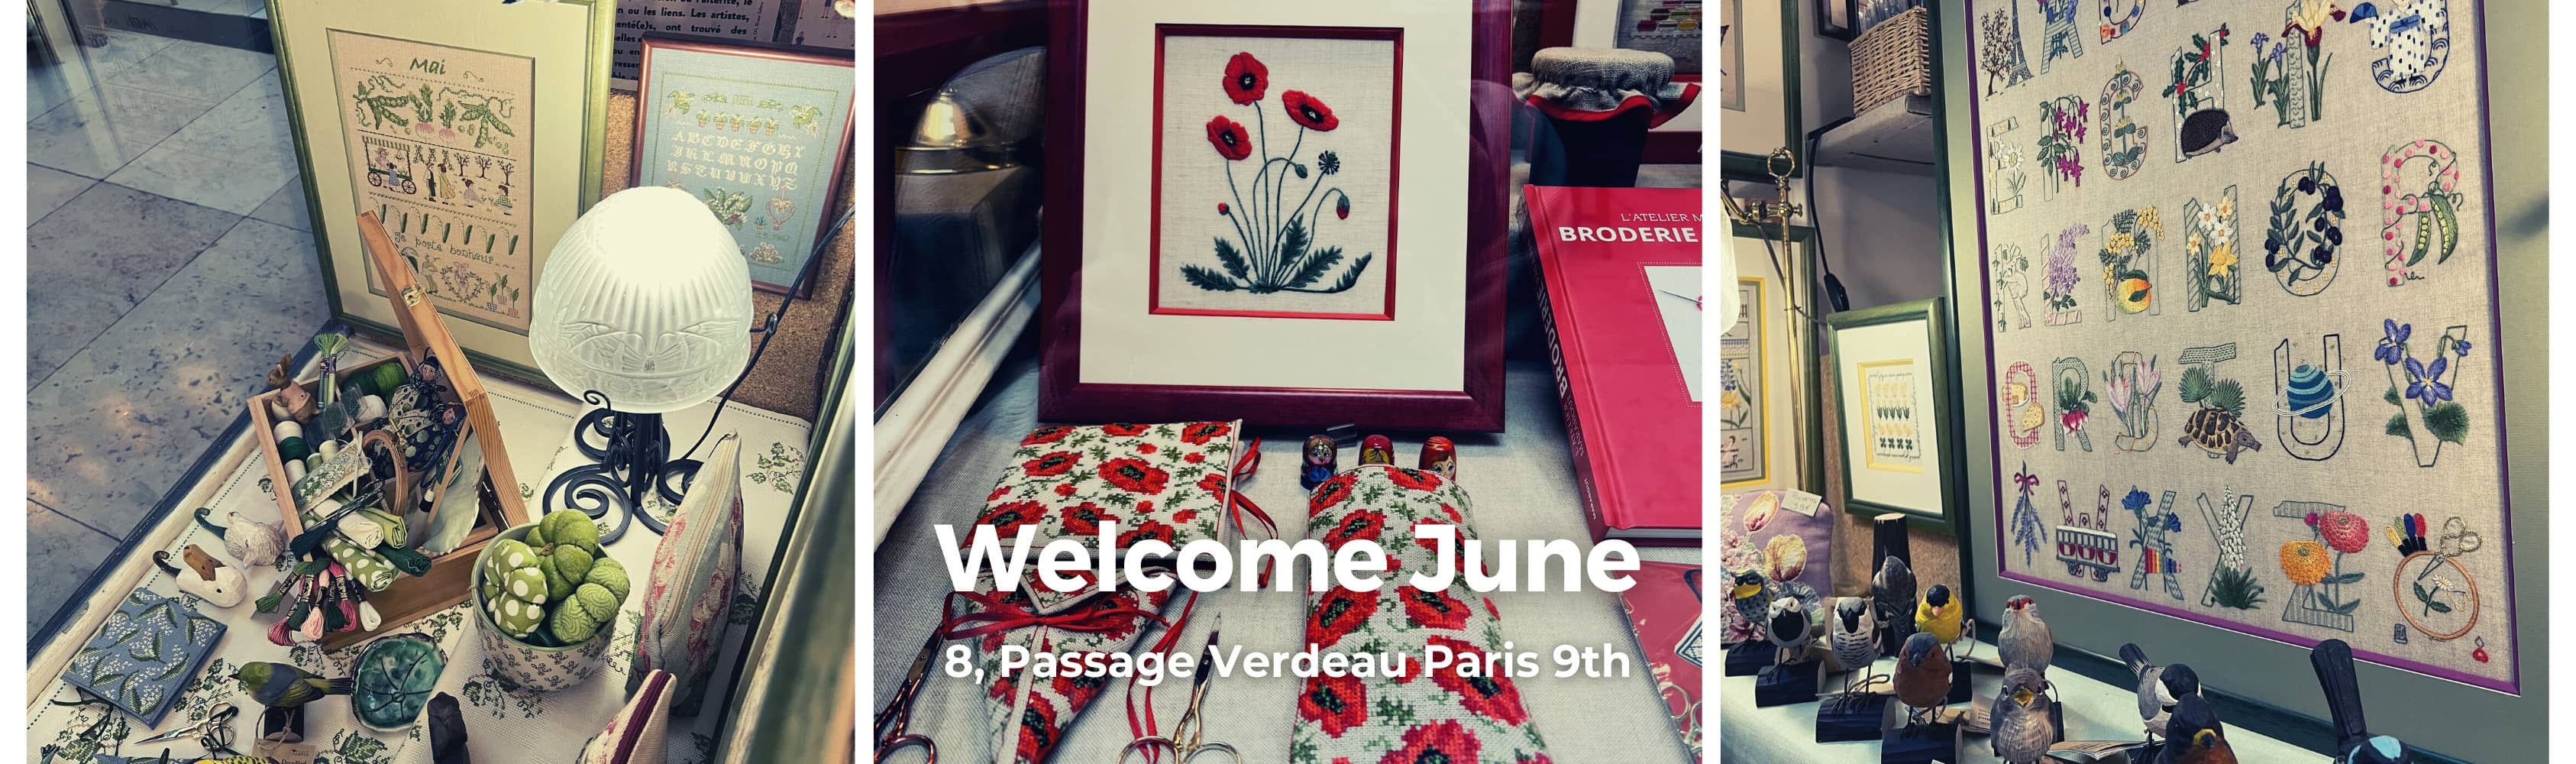 Welcome June. Shop-windows of our store at 8 Passage Verdeau Paris 9th - June selection of embroideries and decorations